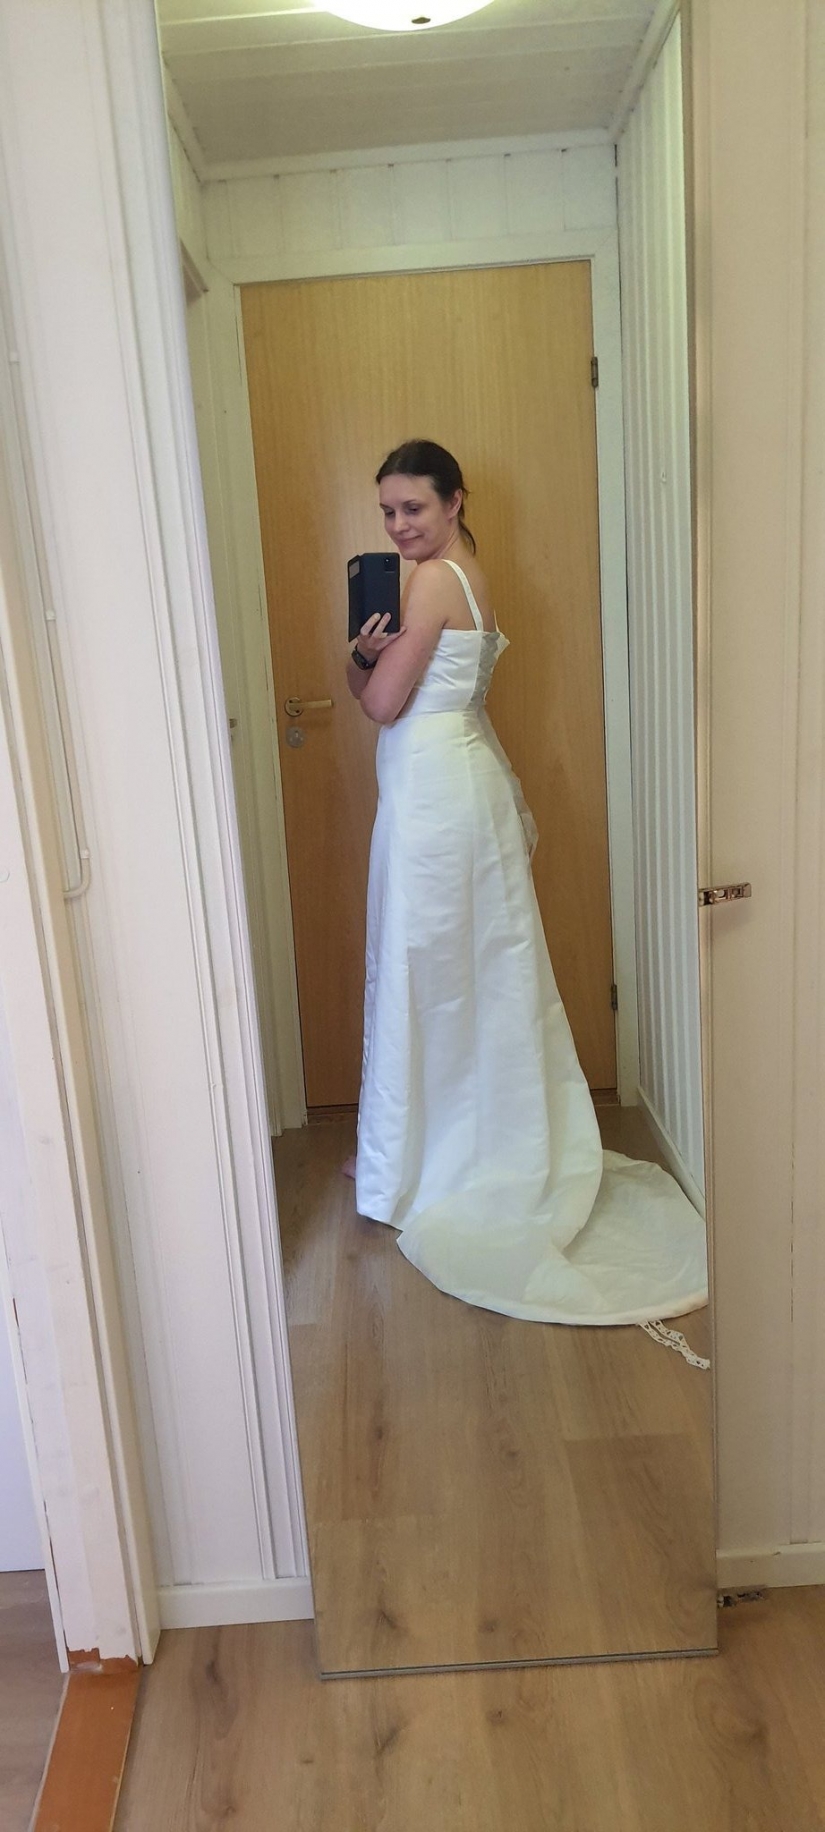 Dispel anguish! British women wear wedding dresses to cheer themselves in isolation